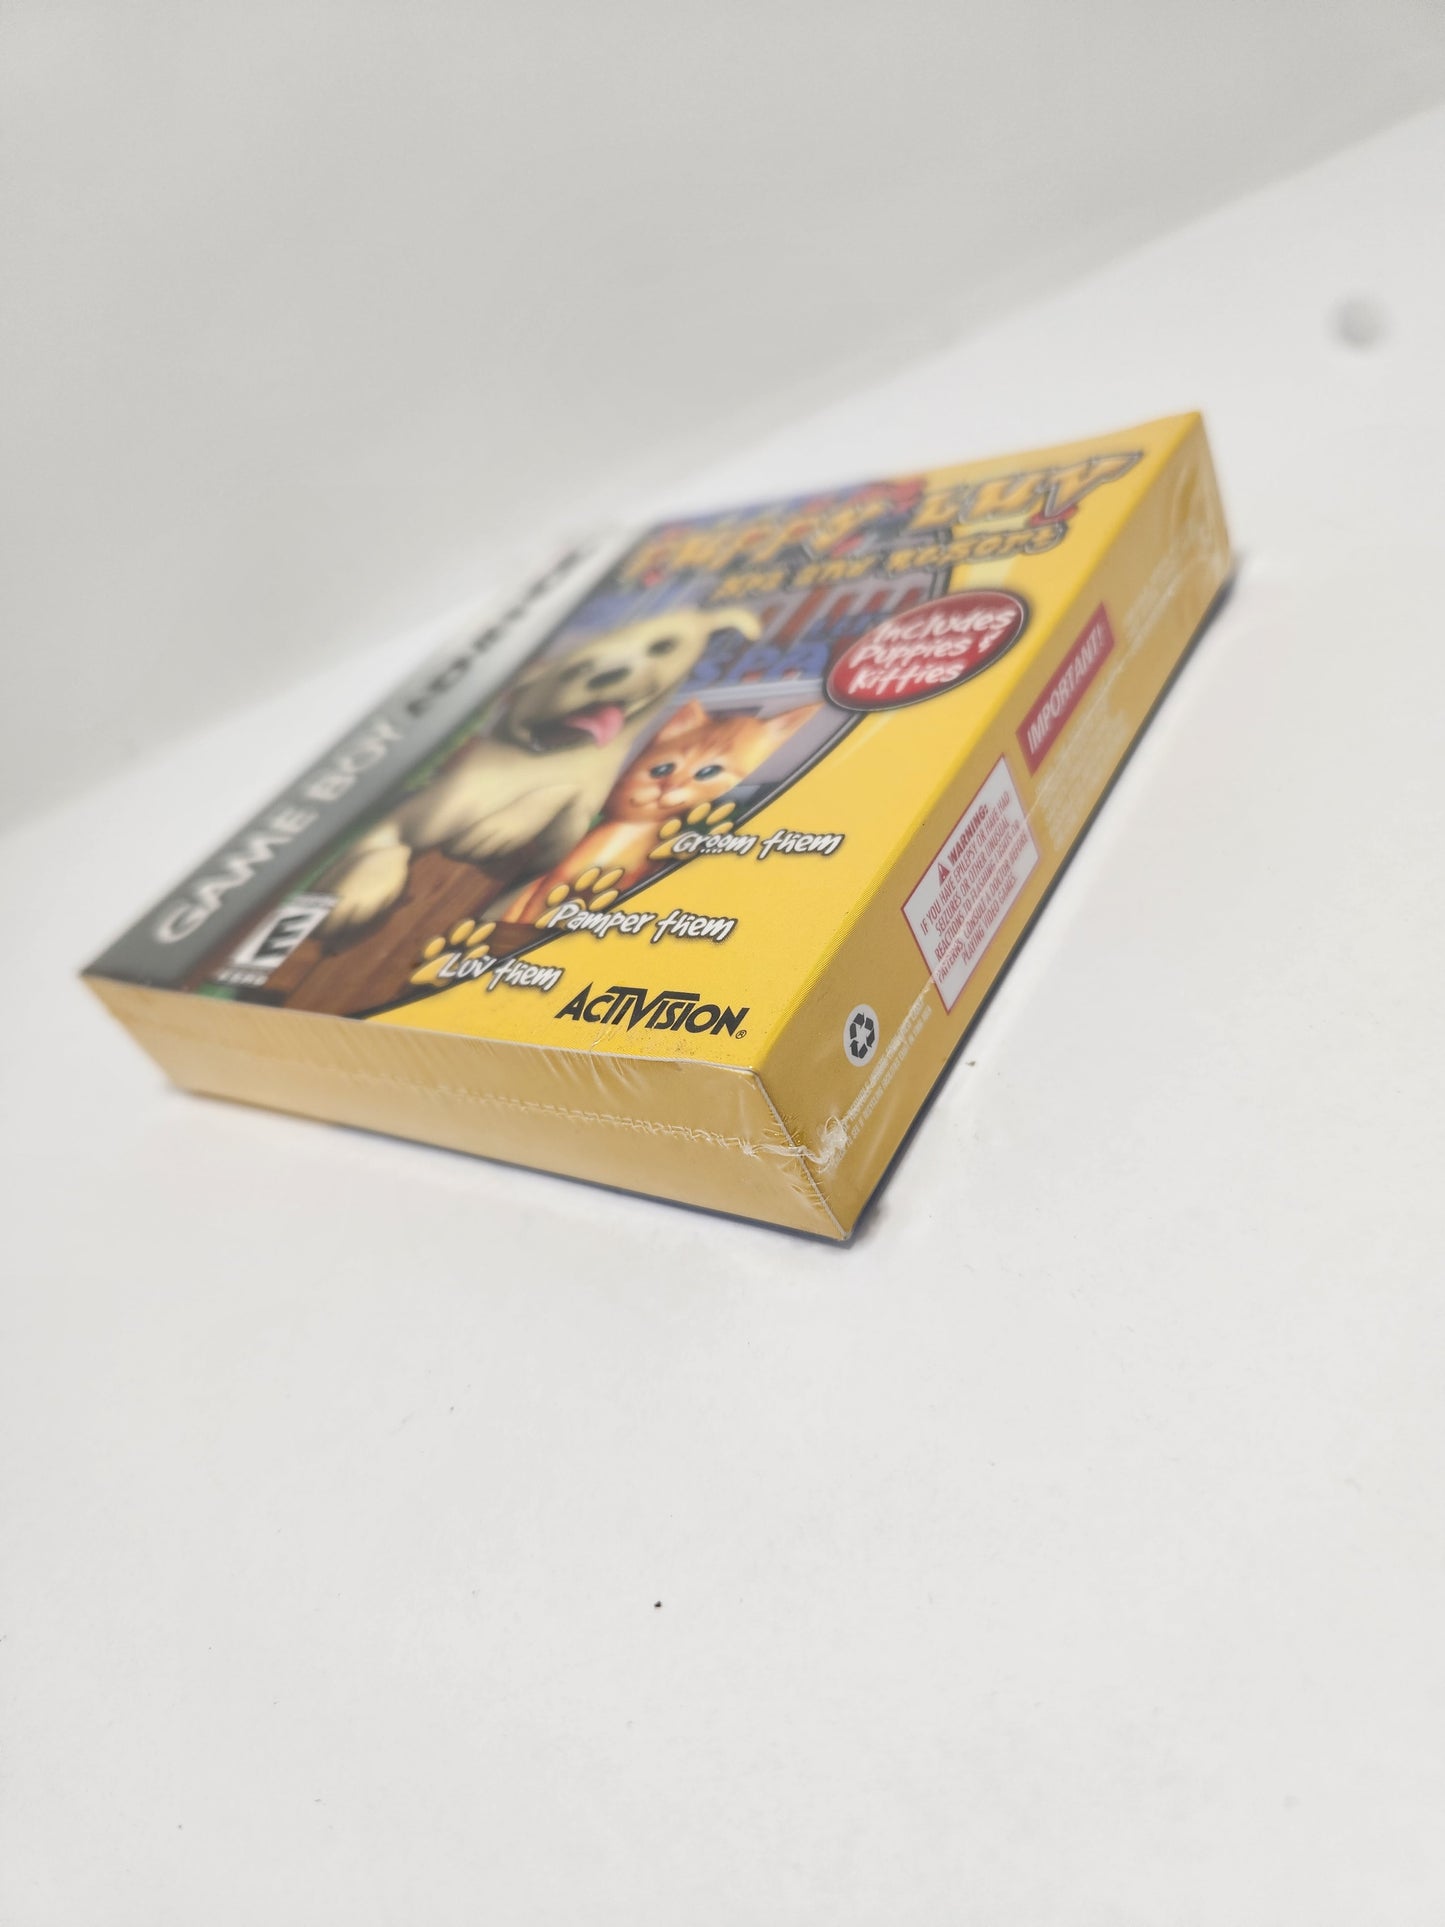 GBA Puppy Love SEALED